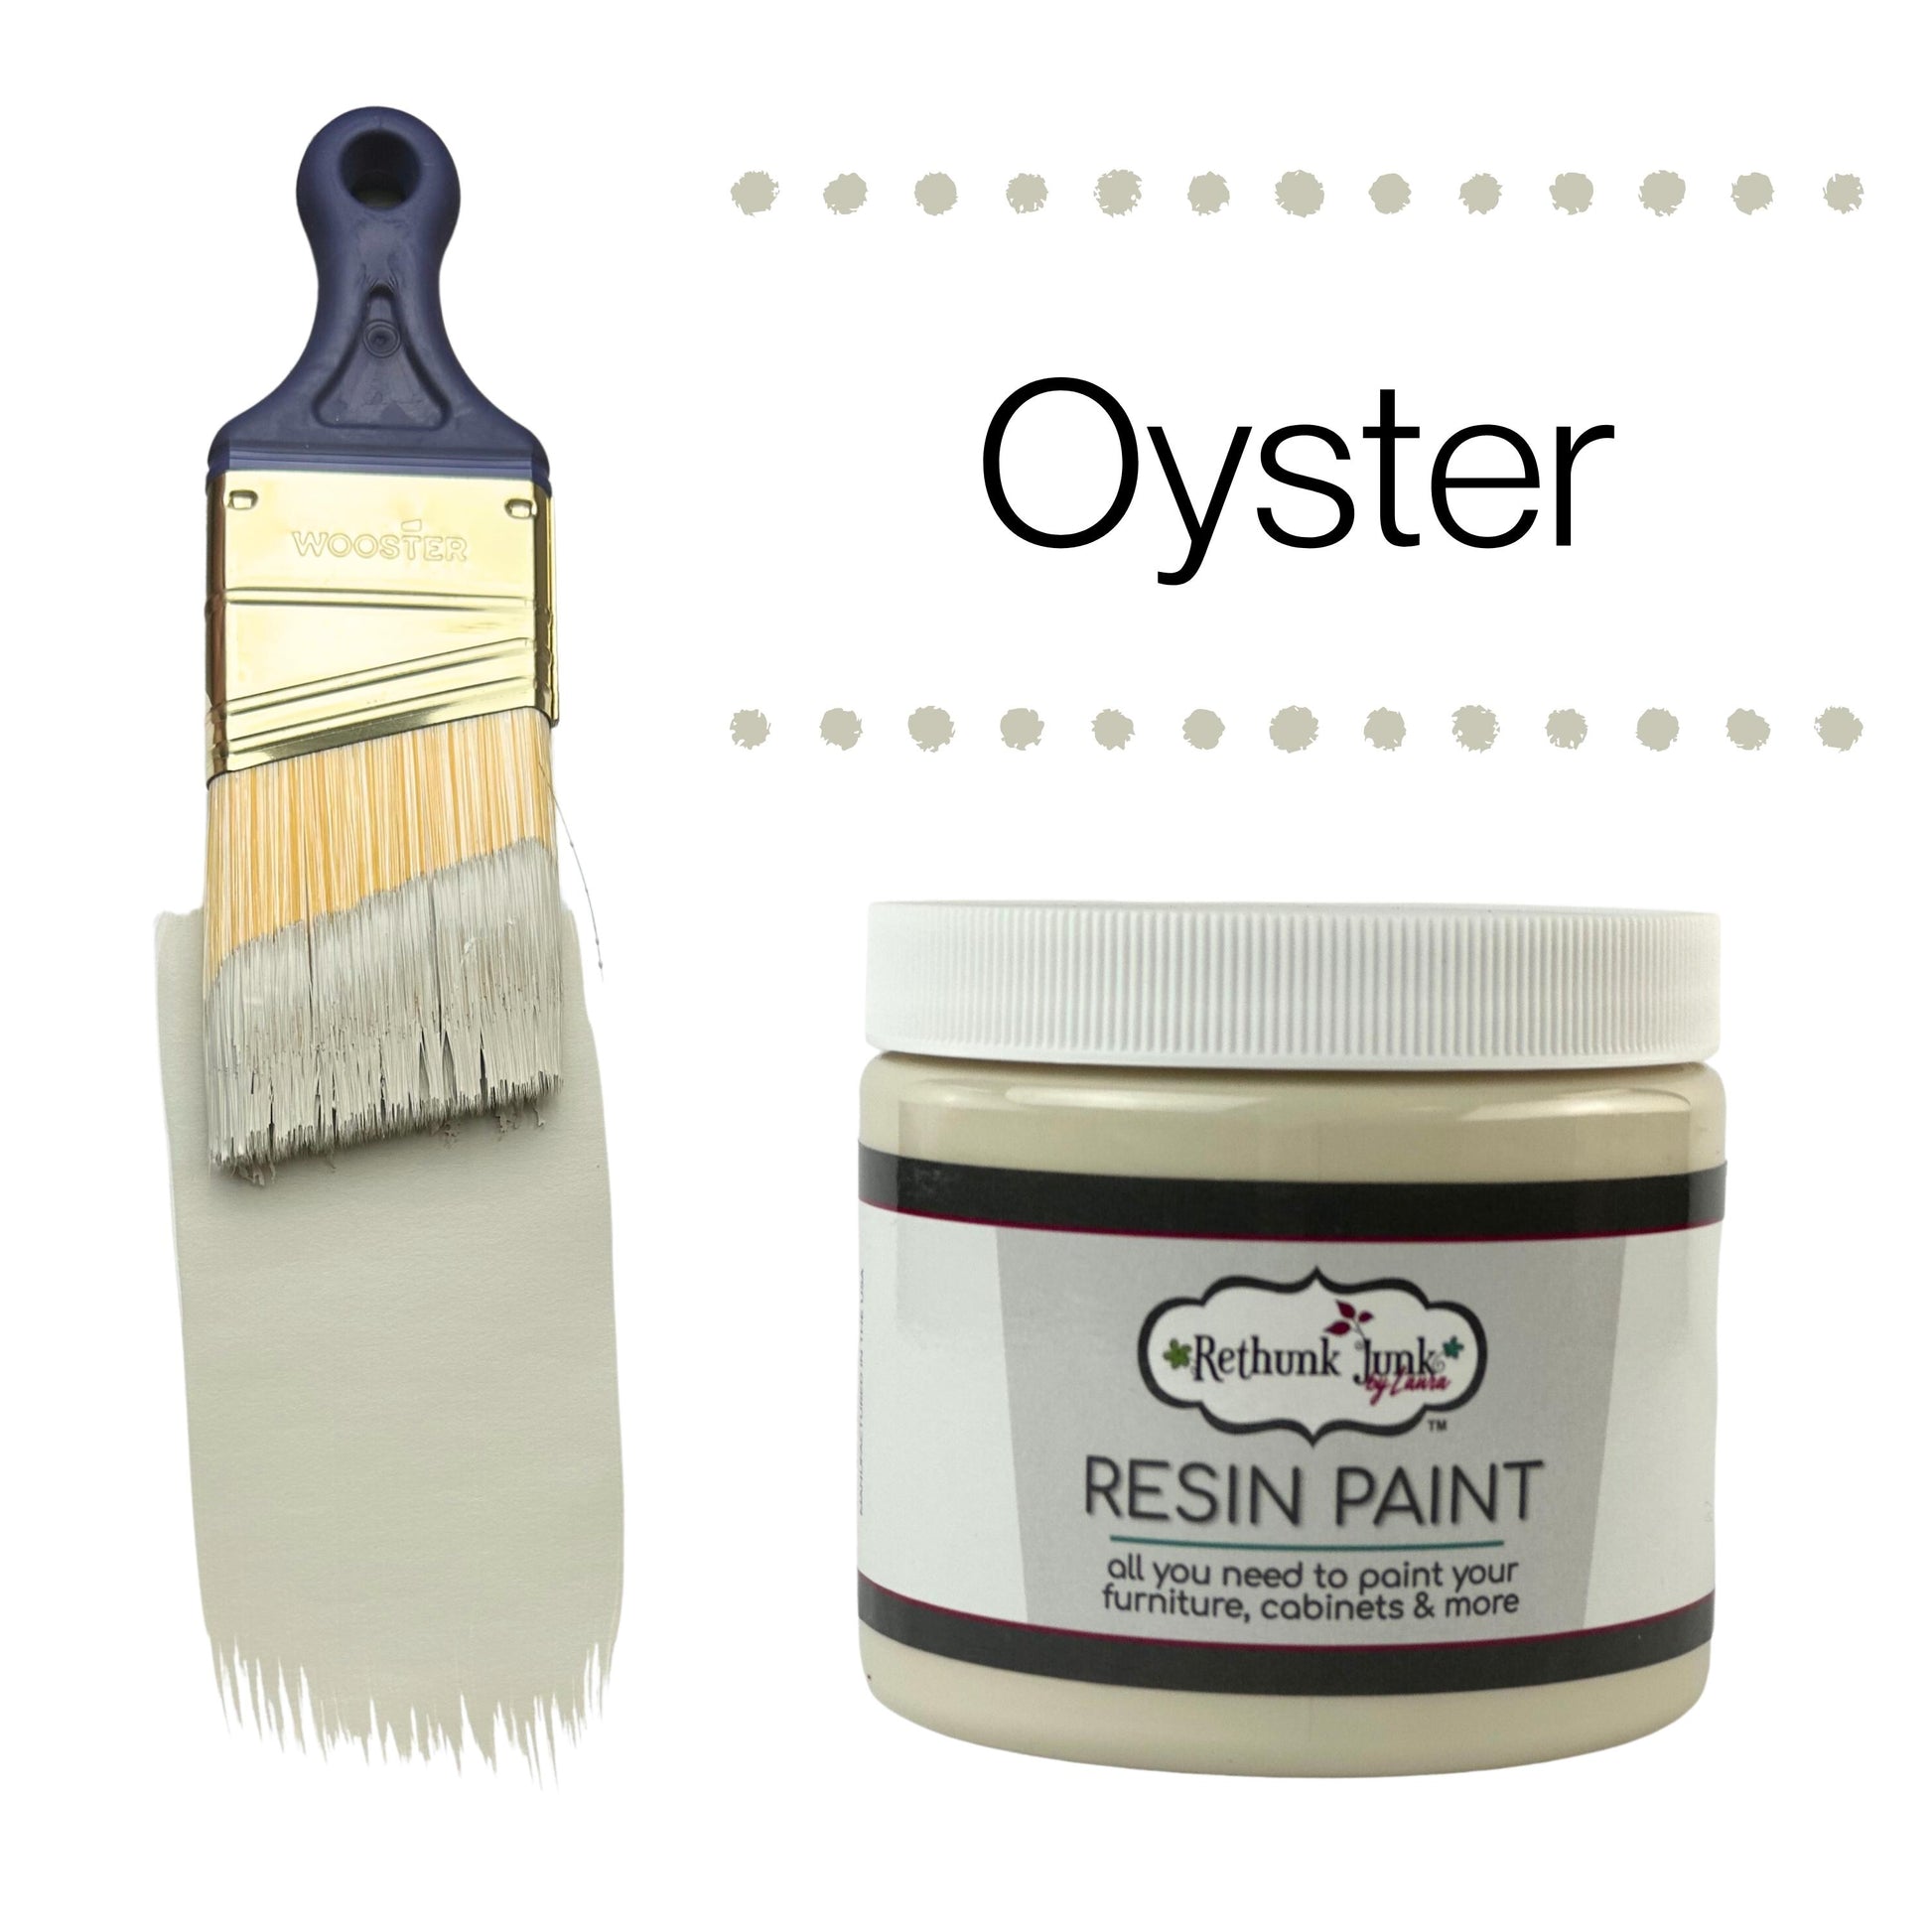 Rethunk Junk by Laura Resin Paint Oyster – Rethunk Junk Paint Co